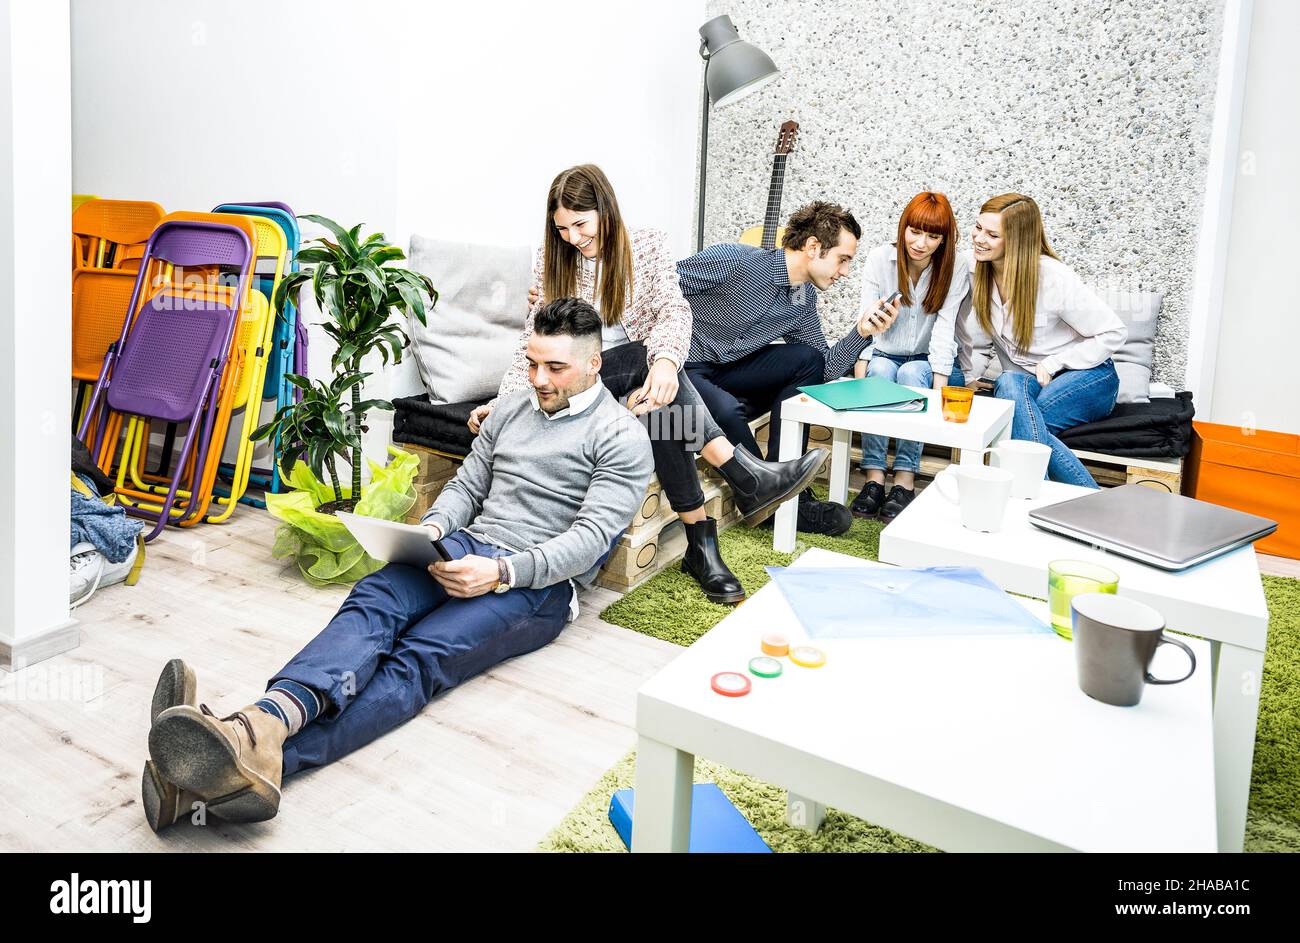 Young people employee workers having break in start up office - Human resources business concept with creative entrepreneurs having fun together Stock Photo